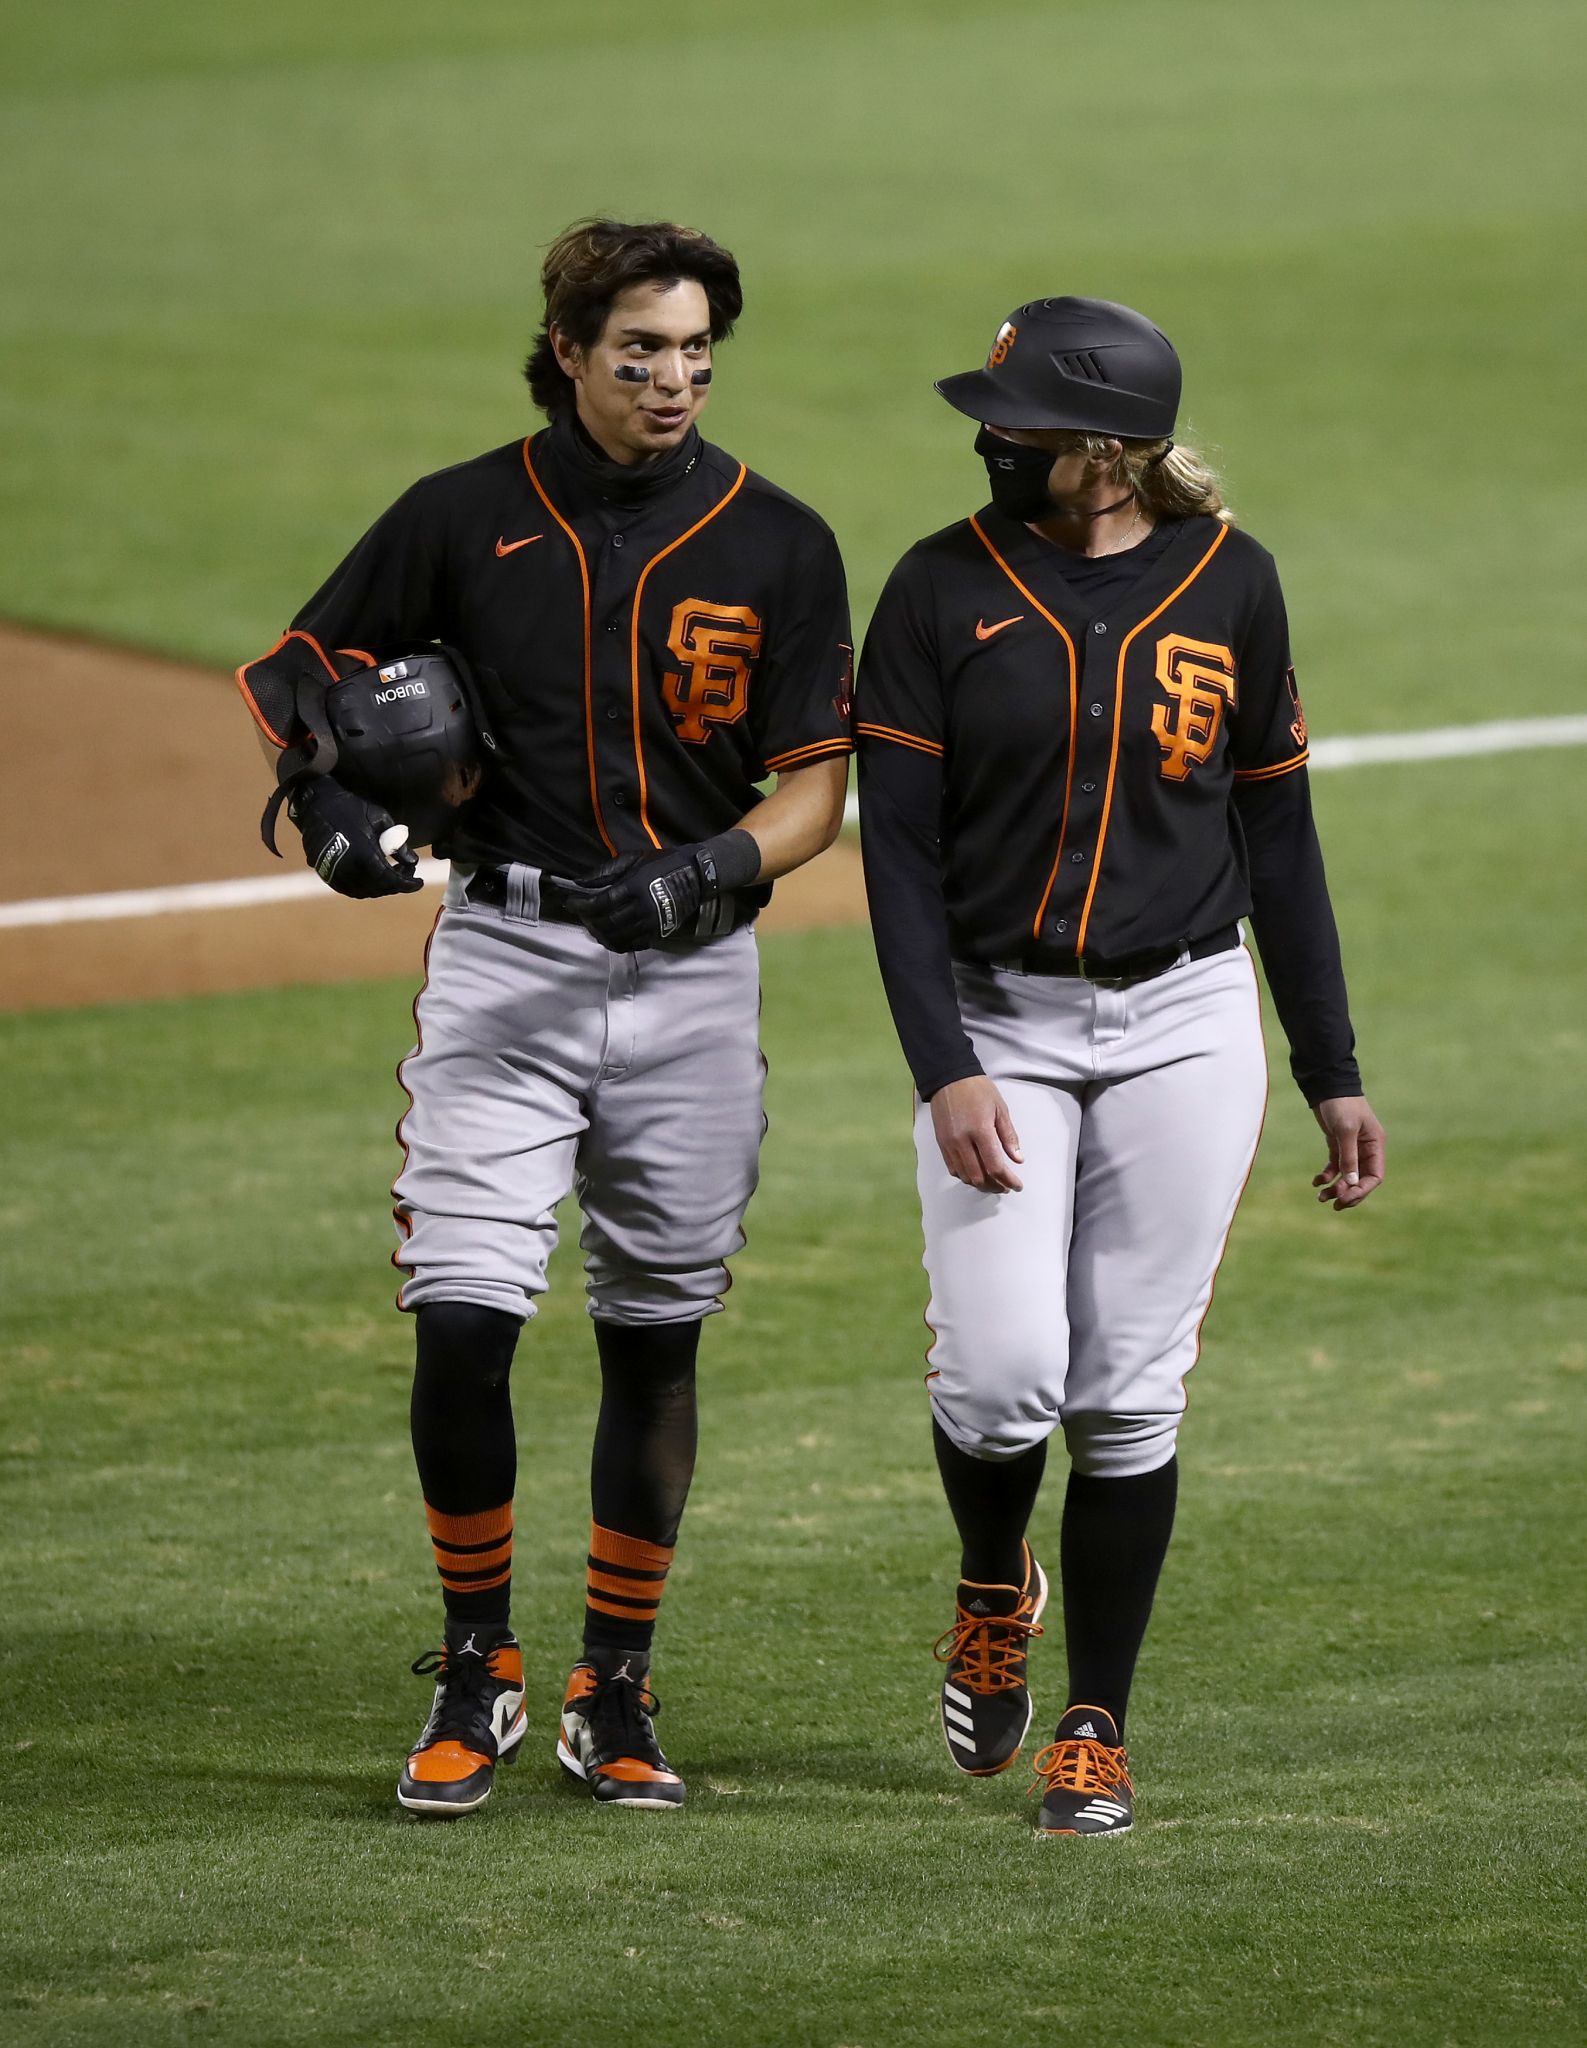 Giants make history with first female first base coach